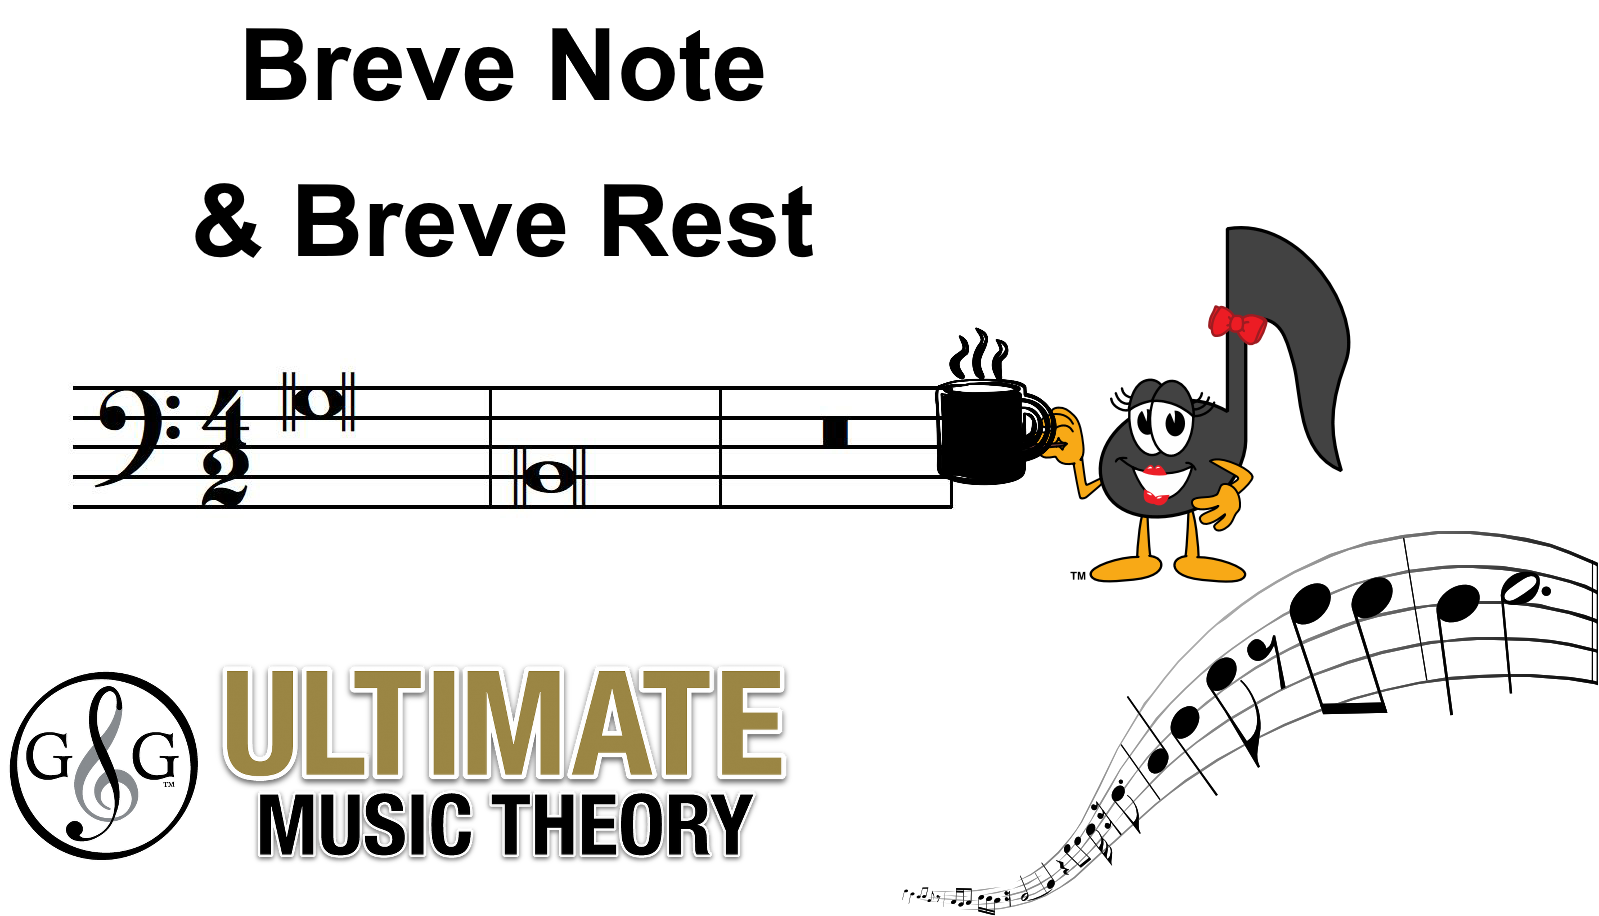 Breve Note and Breve Rest - Ultimate Music Theory.